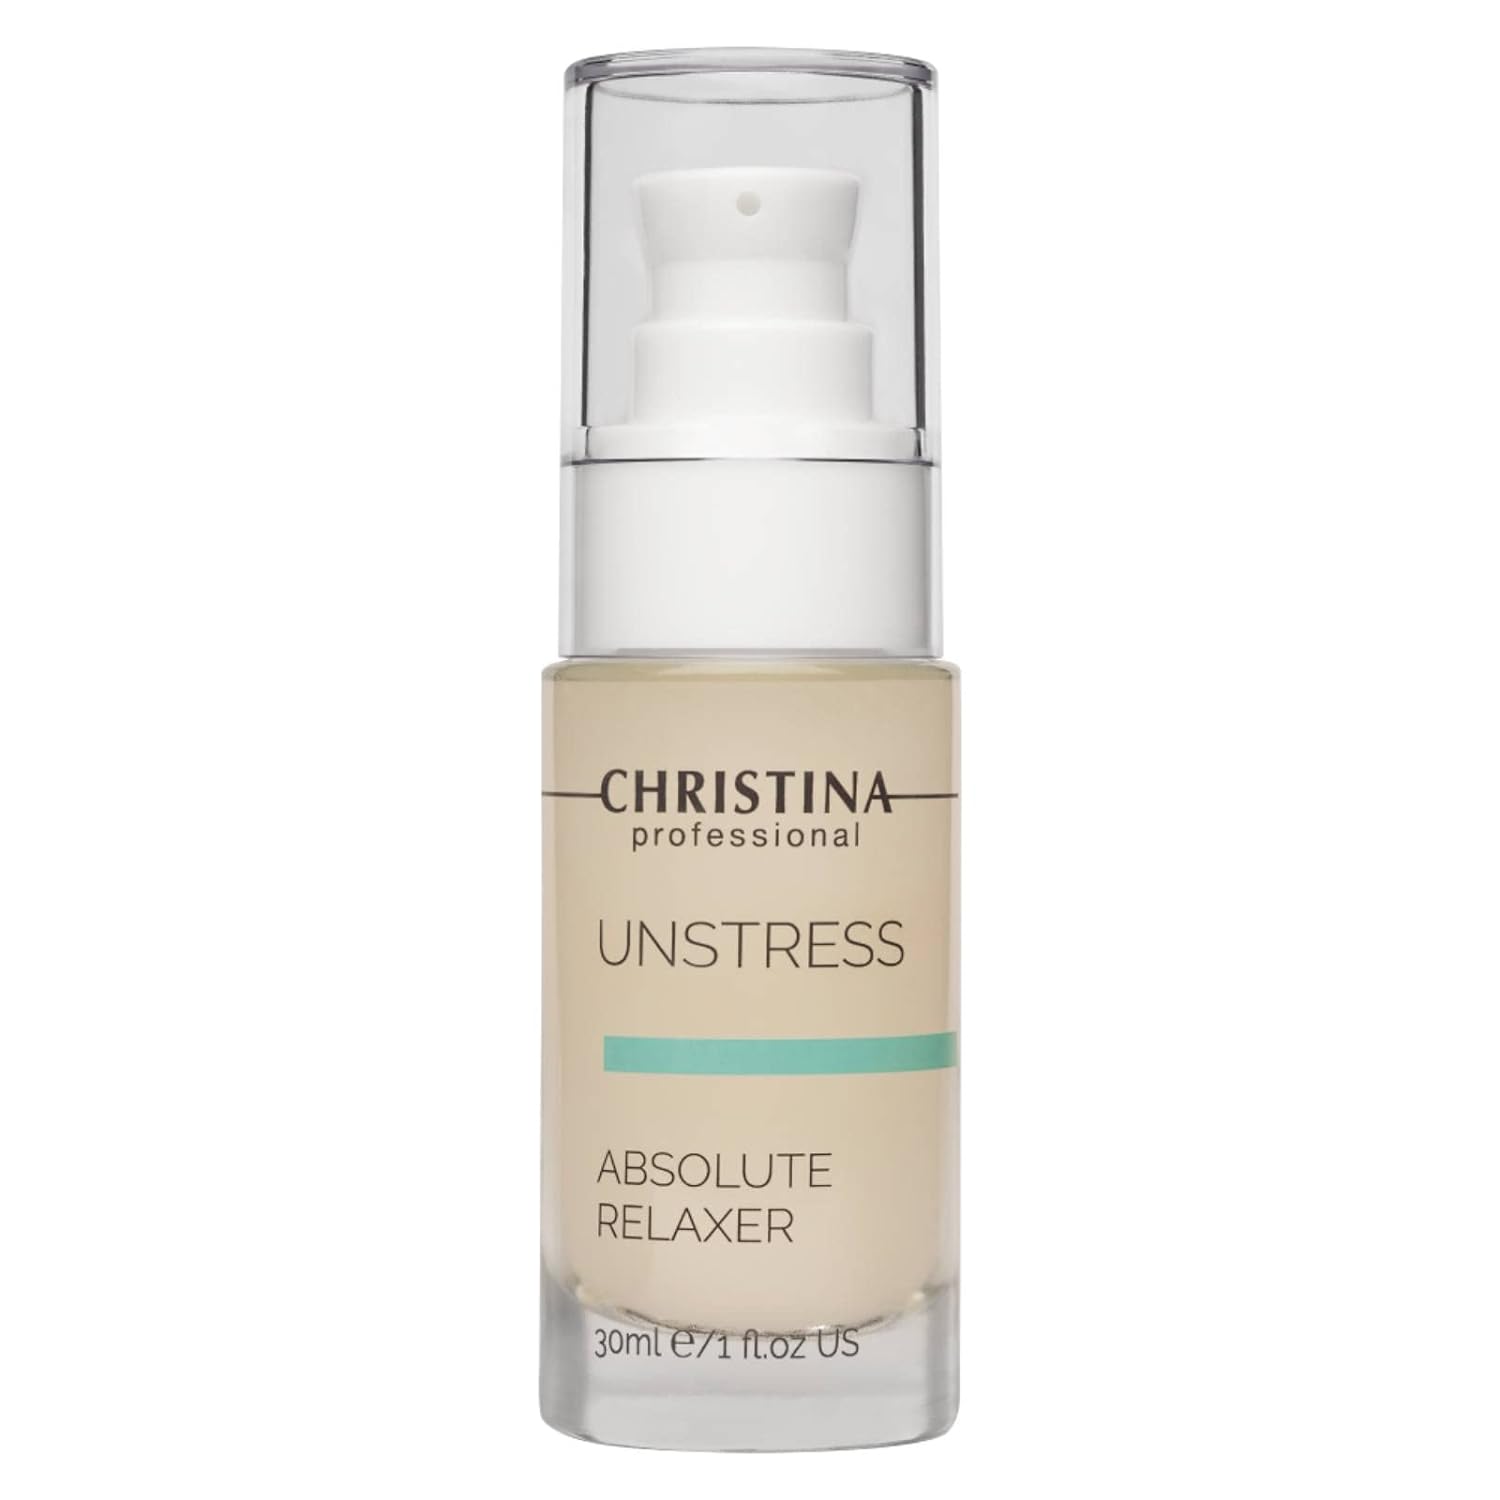 Christina - Unstress - Absolute Relaxer Serum For All Skin Types 30